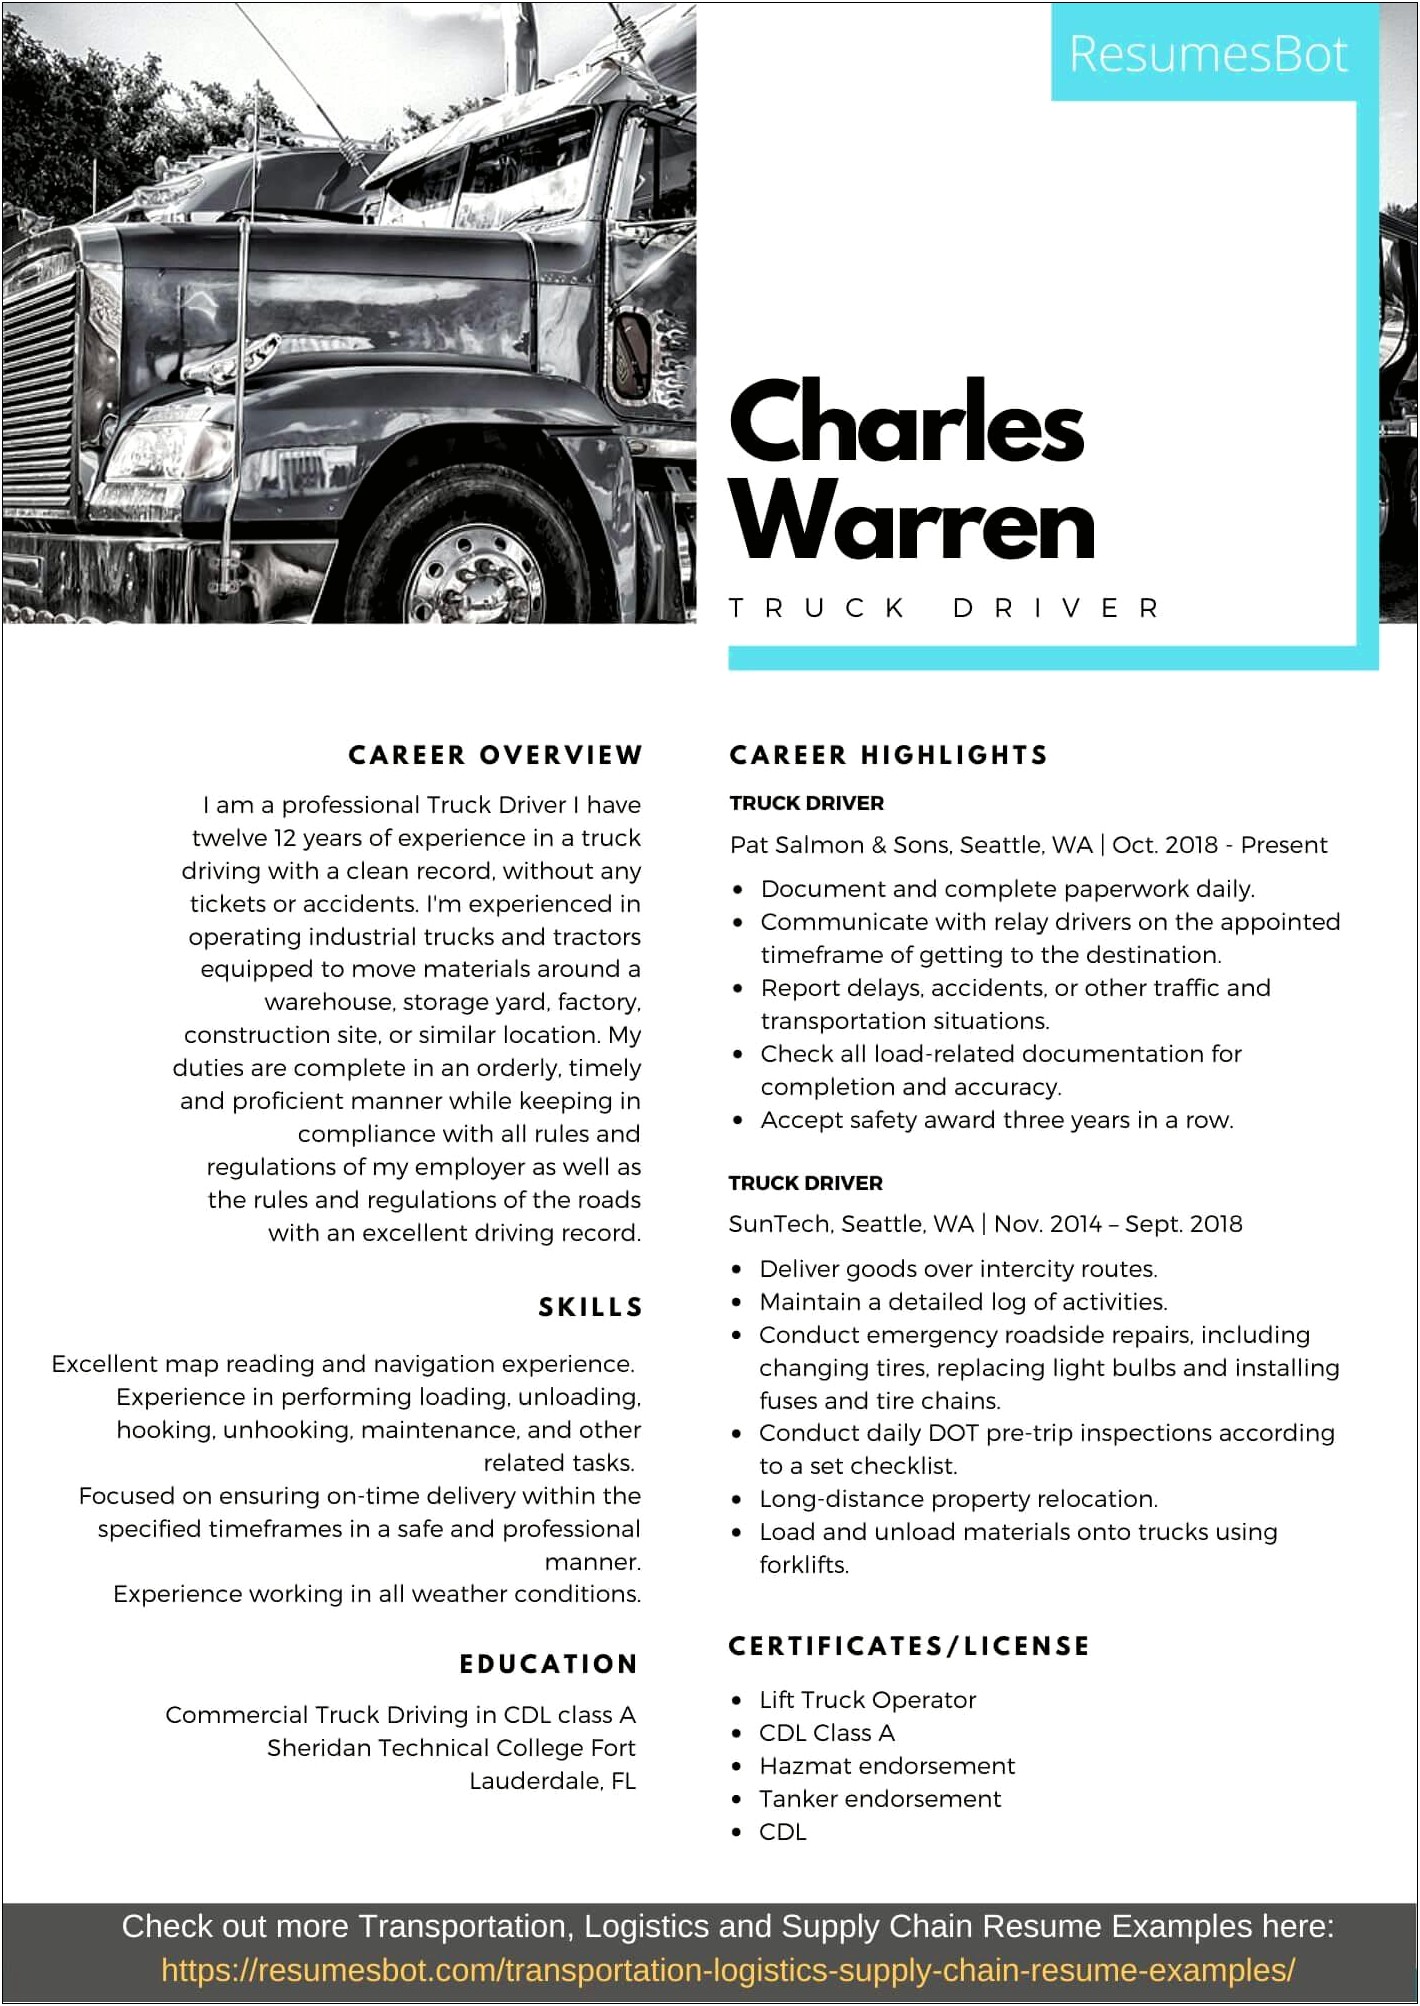 Resume Objective For New Truck Driver Pre Cdl